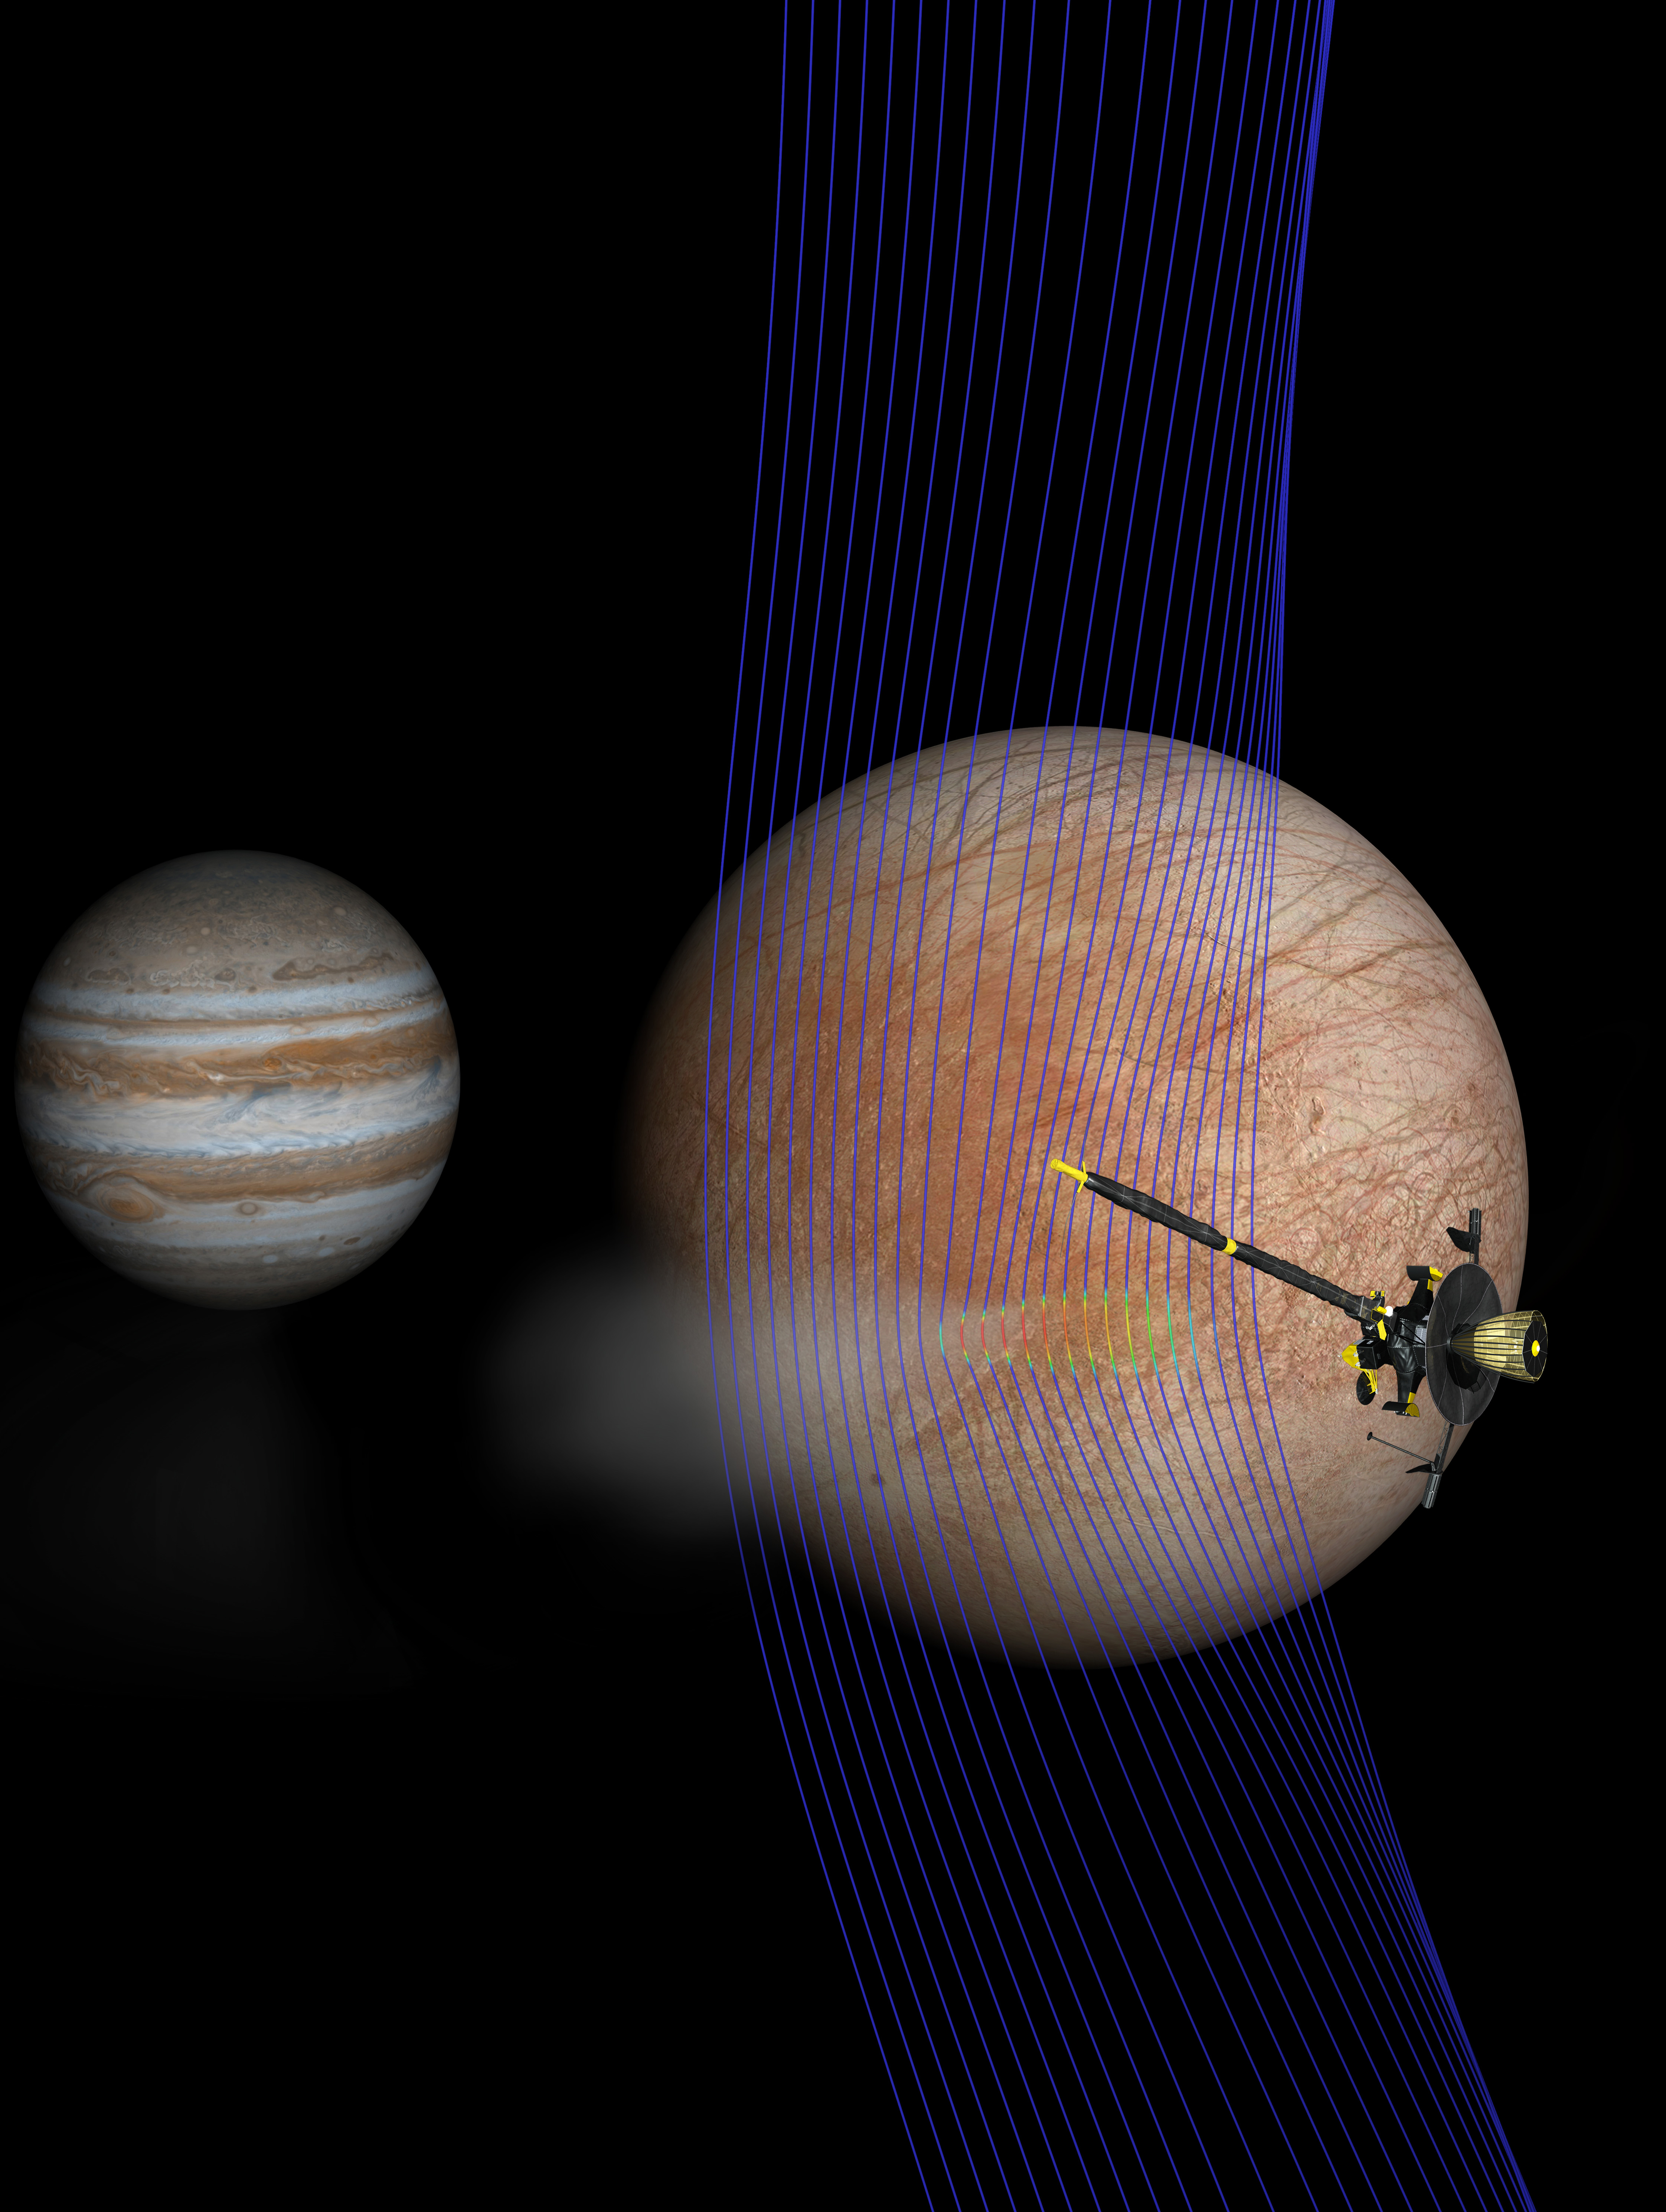 Artist’s illustration of Jupiter and Europa (in the foreground) with the Galileo .